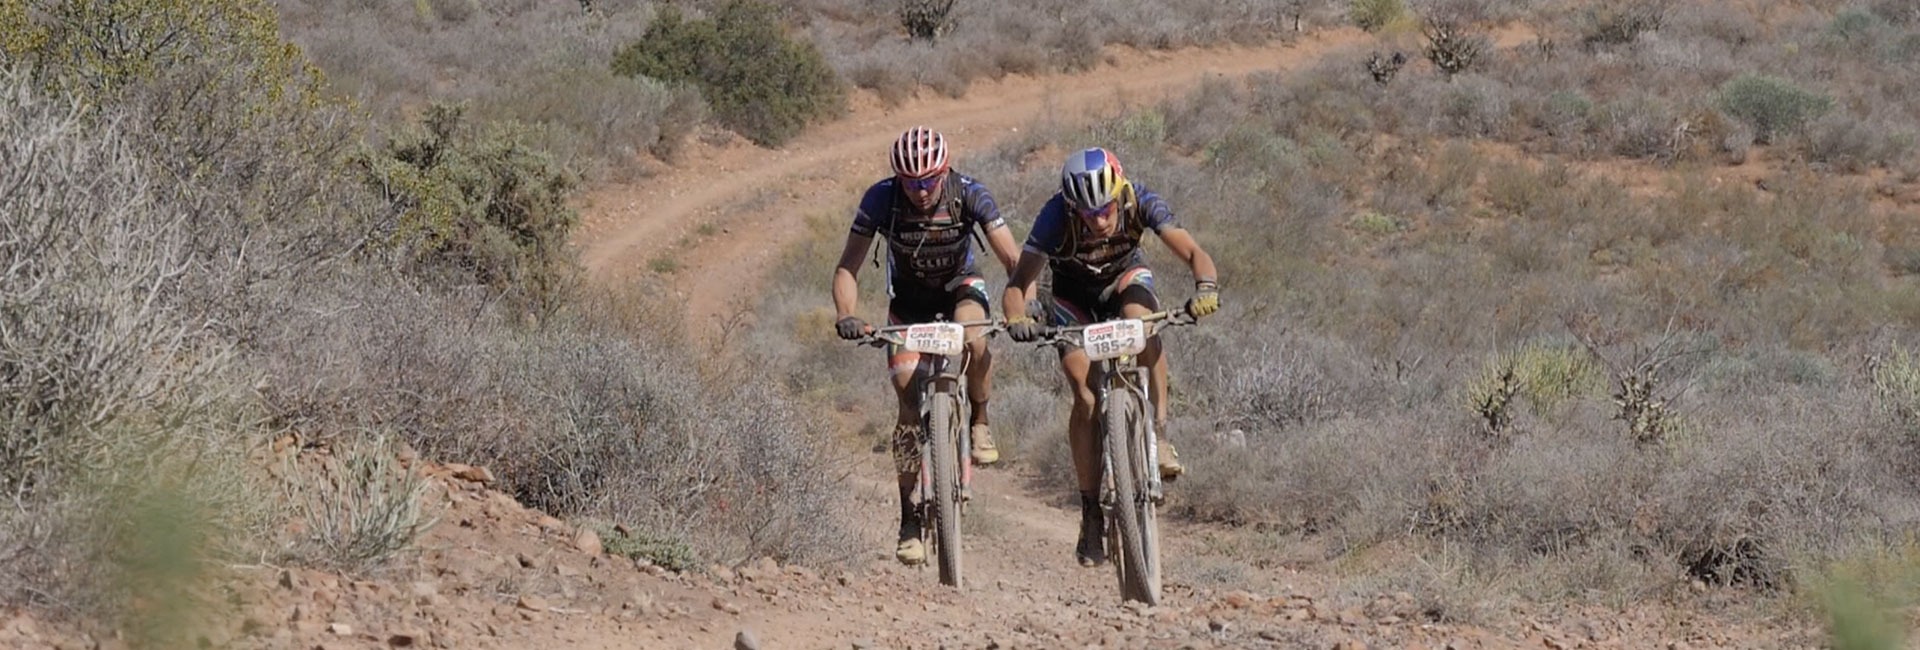 Mountain Biking Tips: Overcoming Fear And Other Challenges | Polar Blog